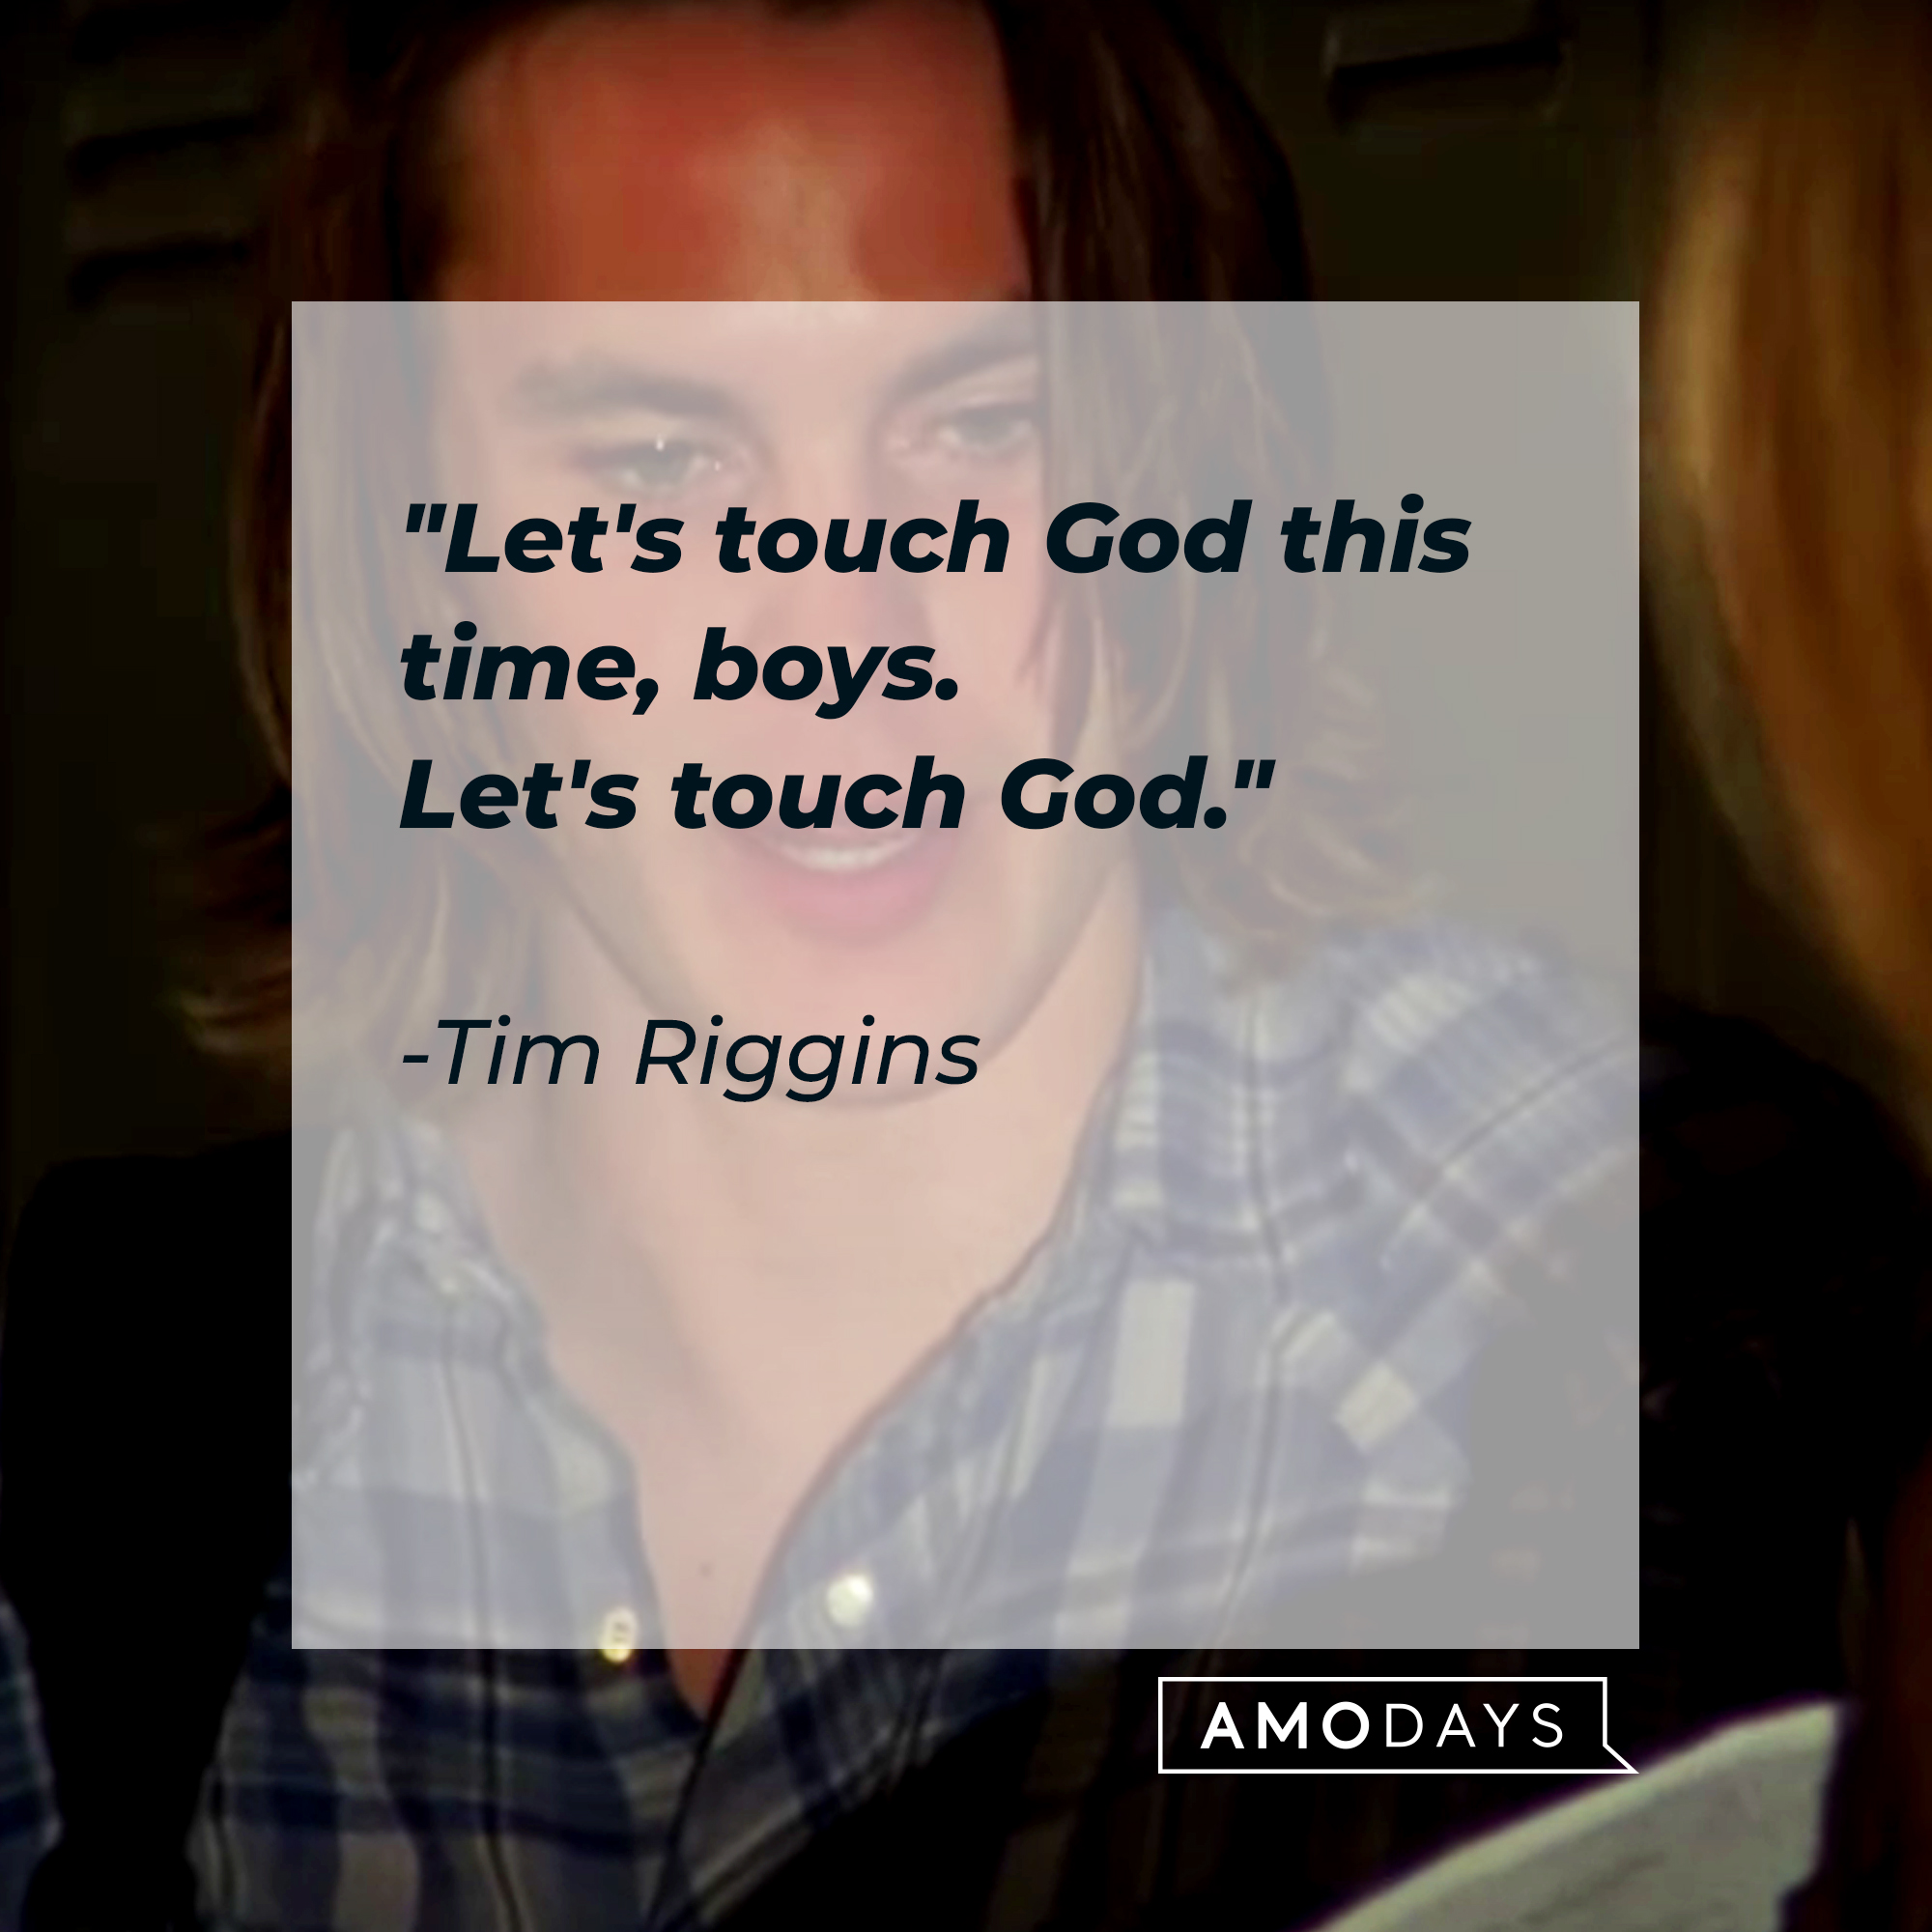 Tim Riggins' quote, "Let's touch God this time, boys. Let's touch God." | Source: Facebook/fridaynightlights